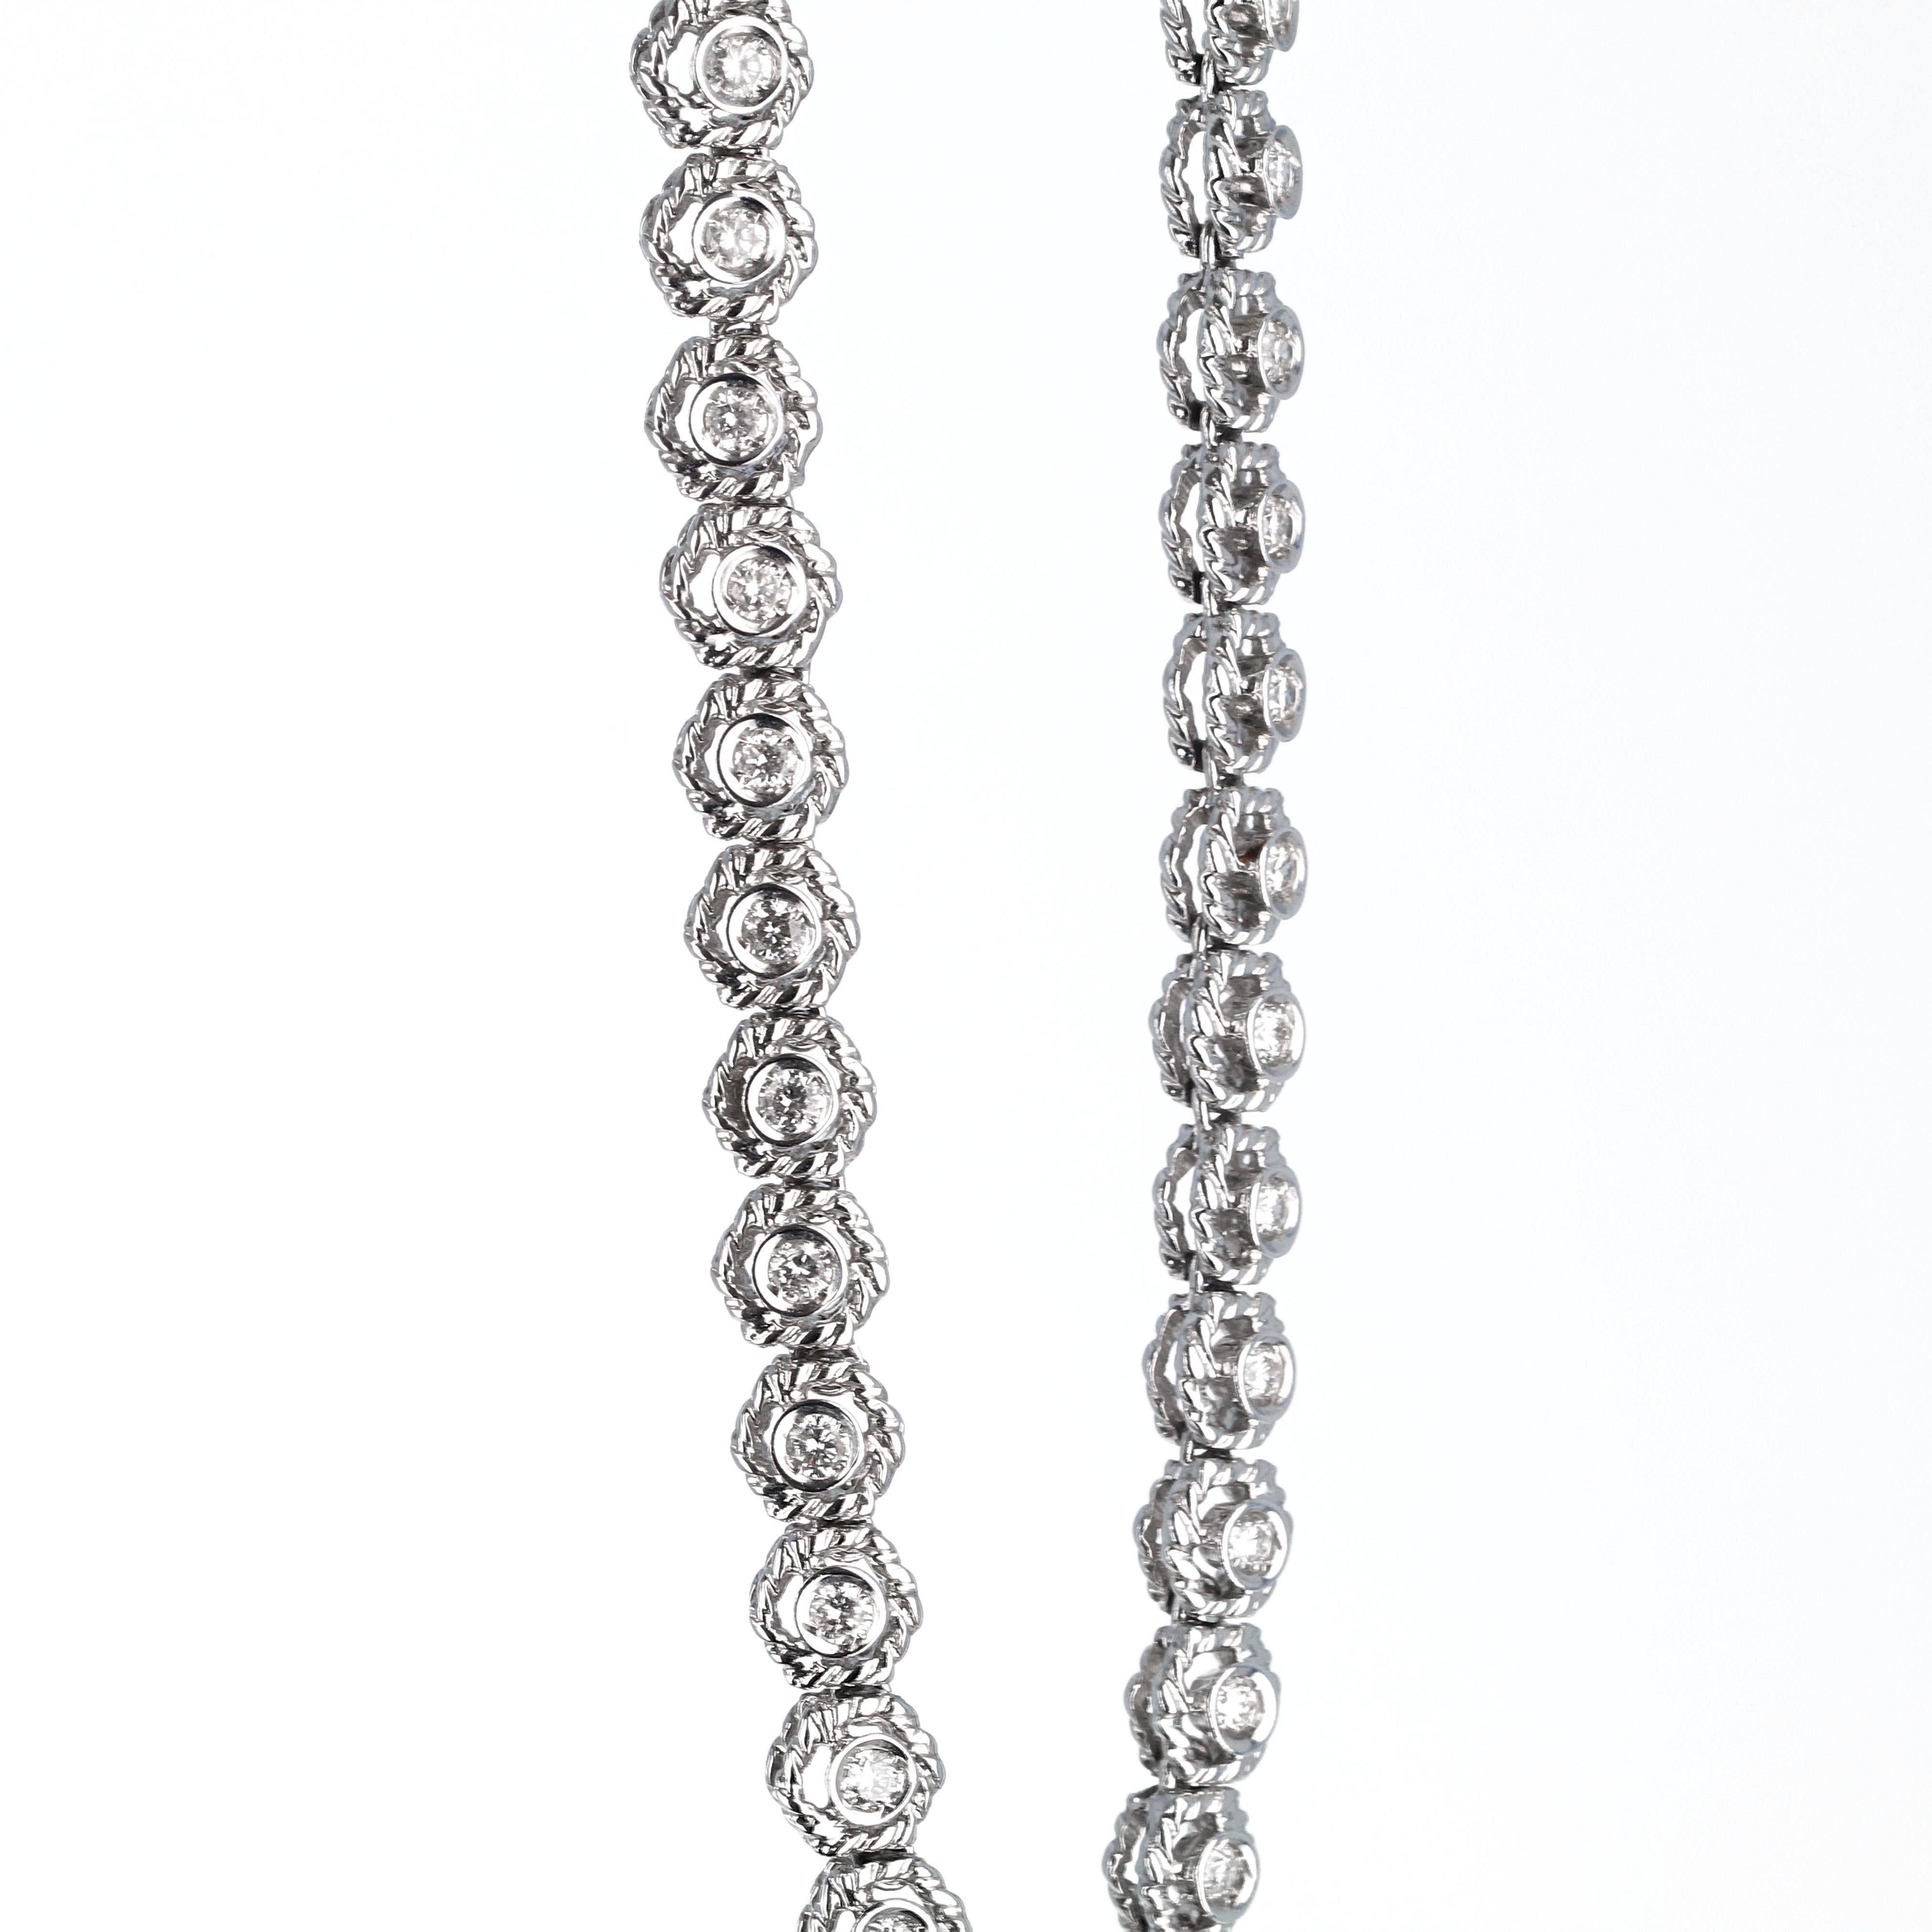 Handmade diamond tennis bracelet by Elizabeth Taylor Collection, House of Taylor. Made in 18k white gold and signed 